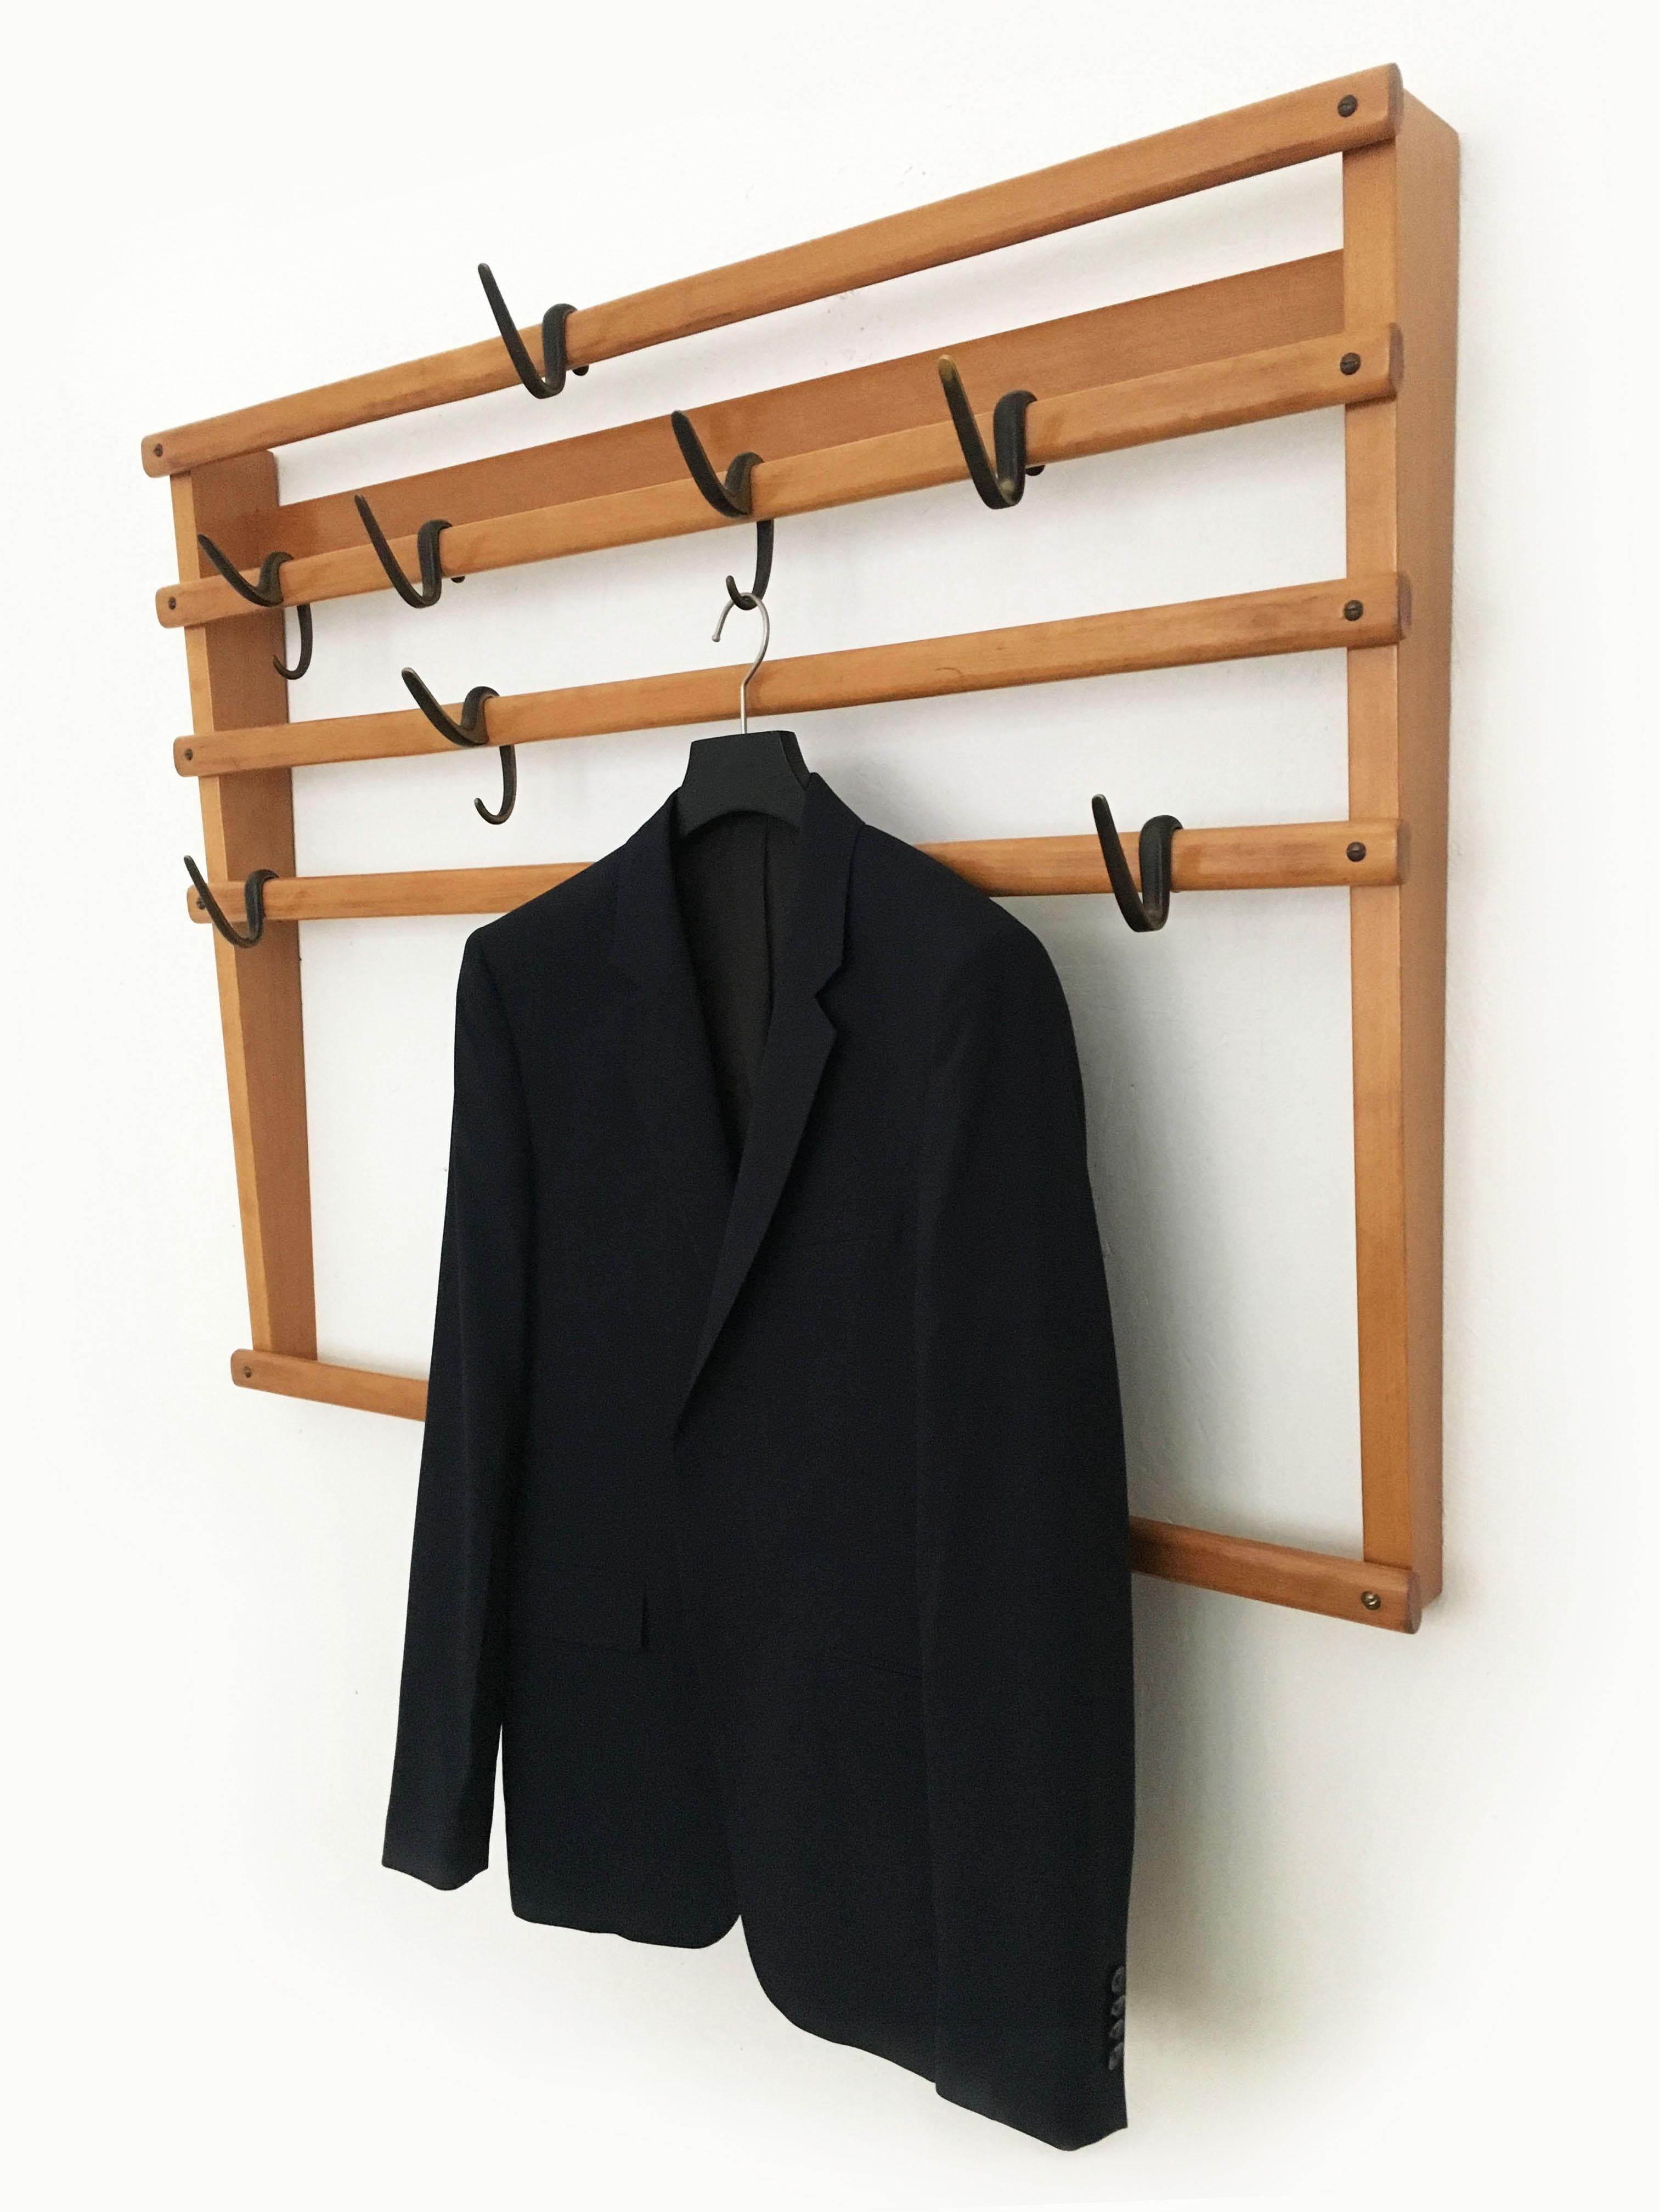 Superb wall-mounted coat rack wardrobe by Carl Auböck, Austria, 1960s. The three 'G'- and five 'S'-shaped hooks are cast brass and finished combining two surface treatments. They are black patinated and polished on their sides. In excellent vintage